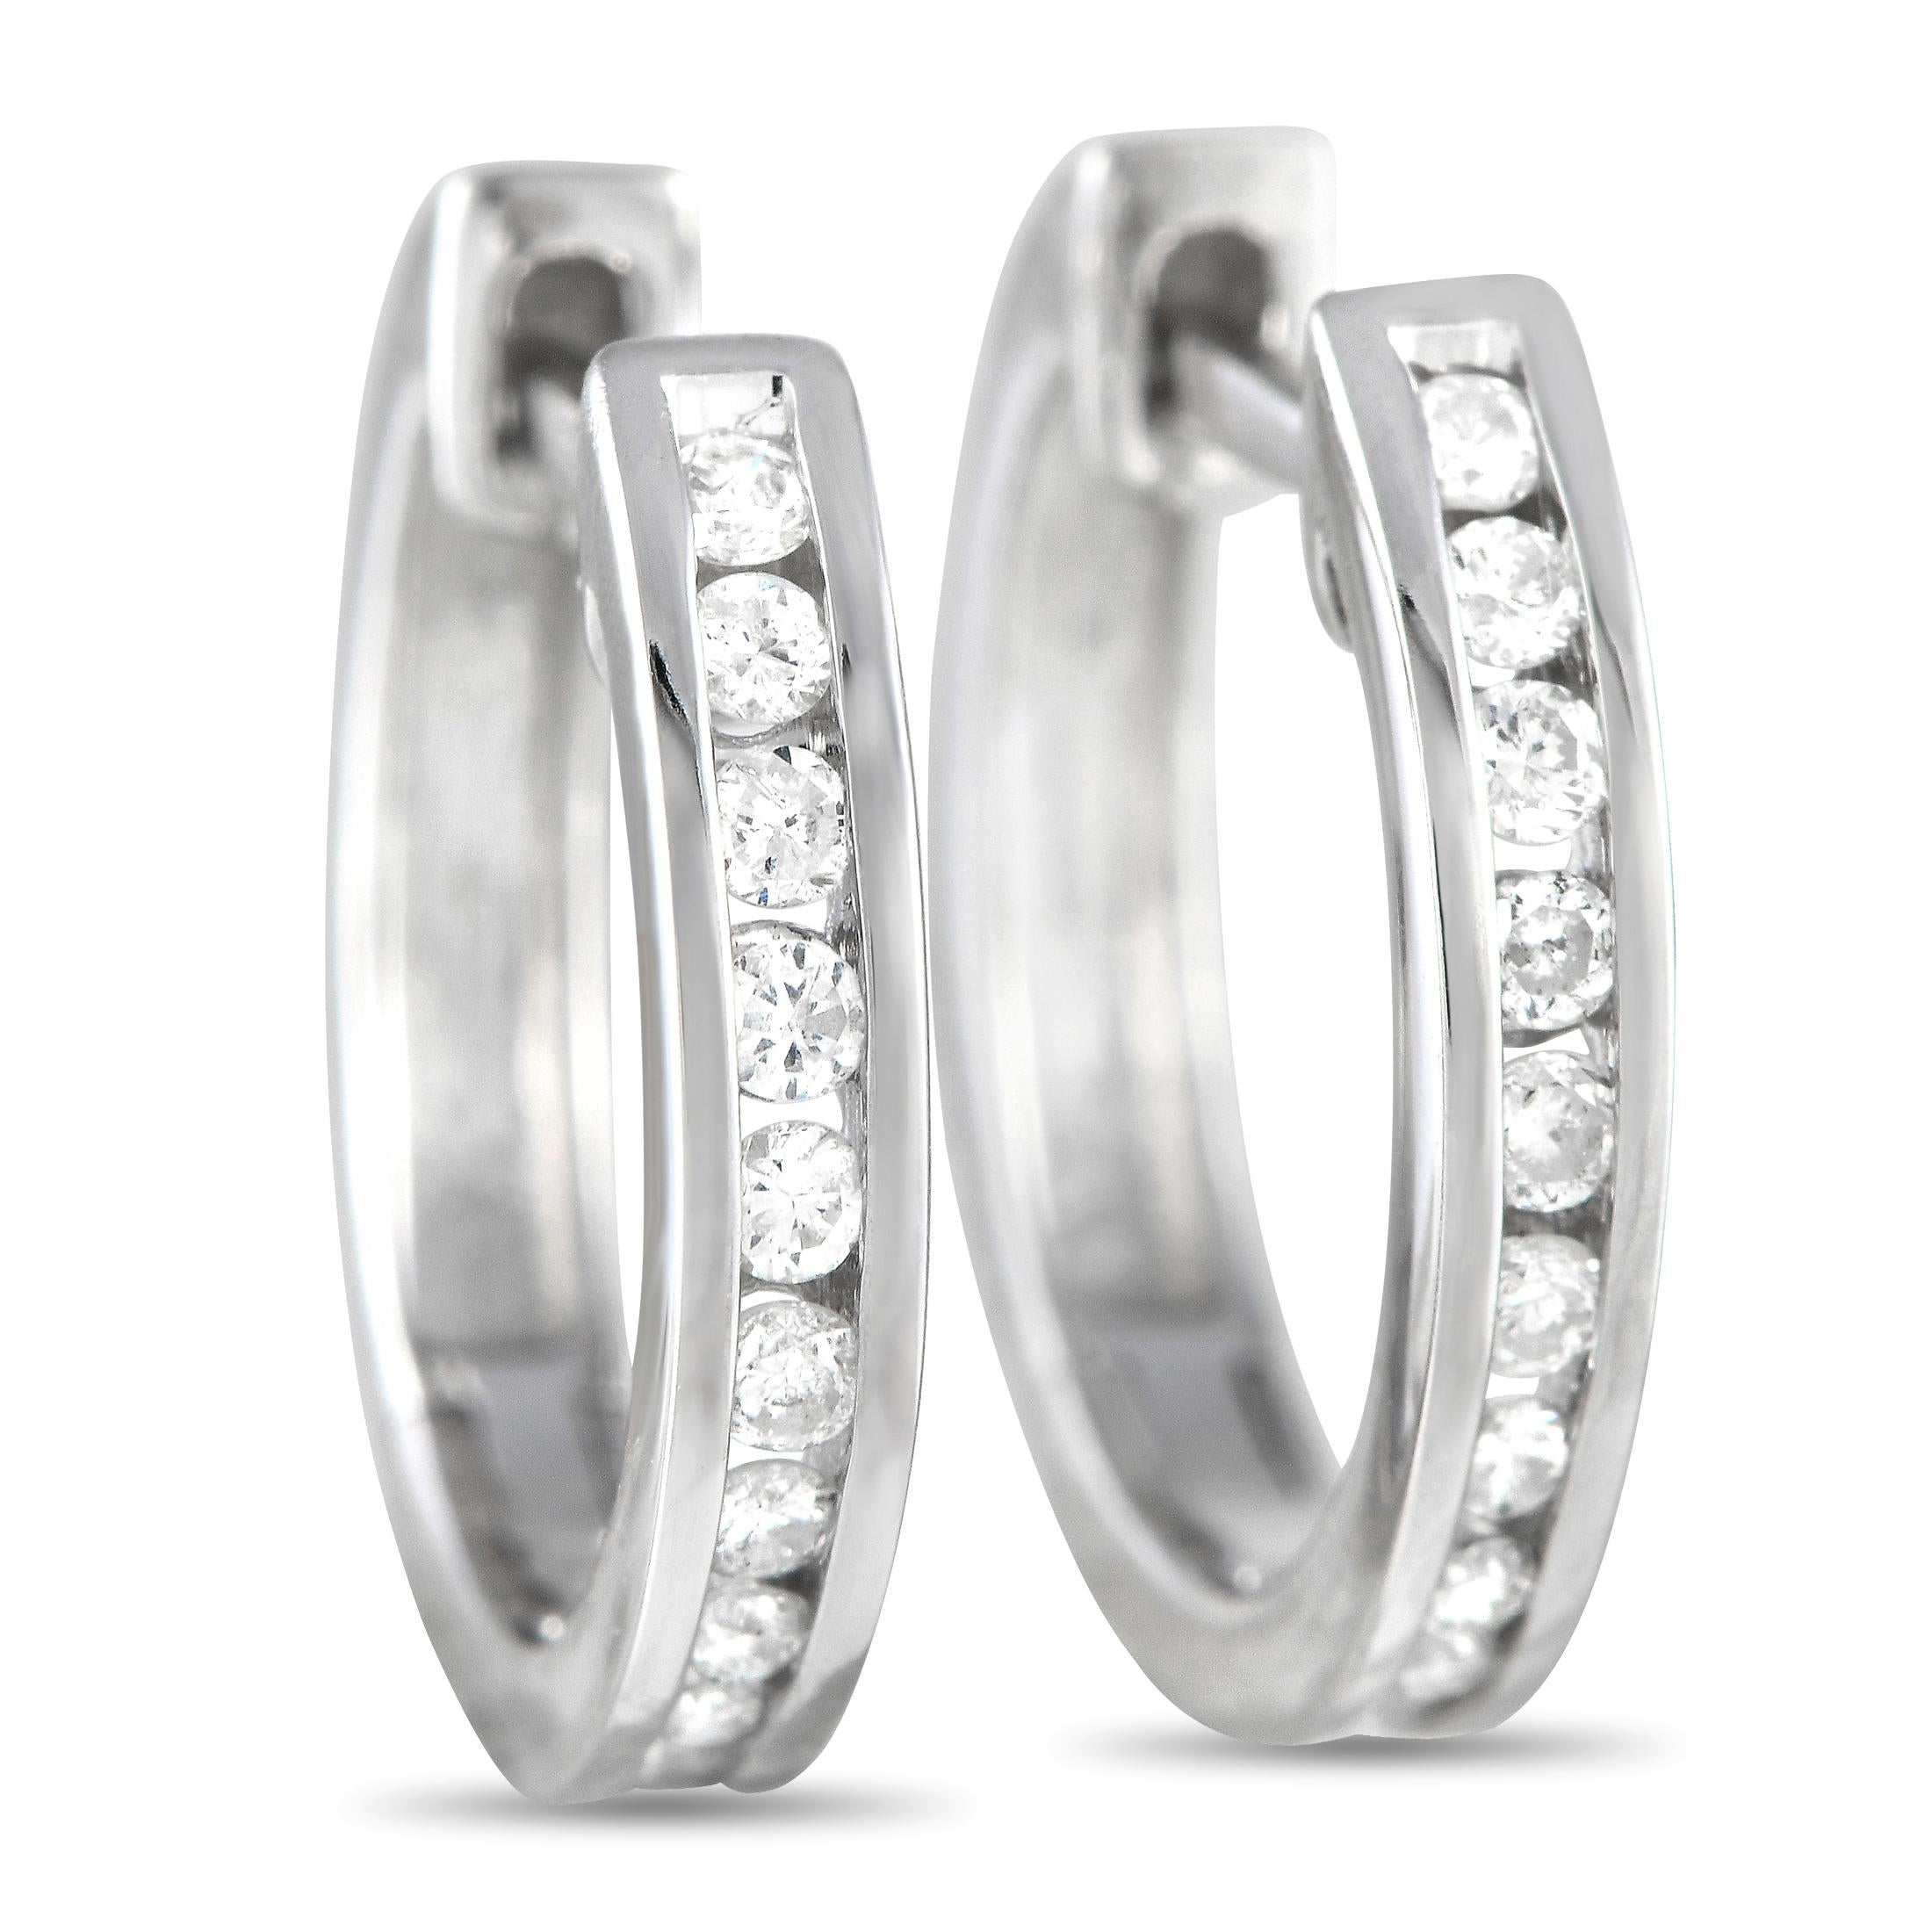 Round Cut Lb Exclusive 14k White Gold 0.25 Carat Diamond Channel-Set Hoop Earrings For Sale